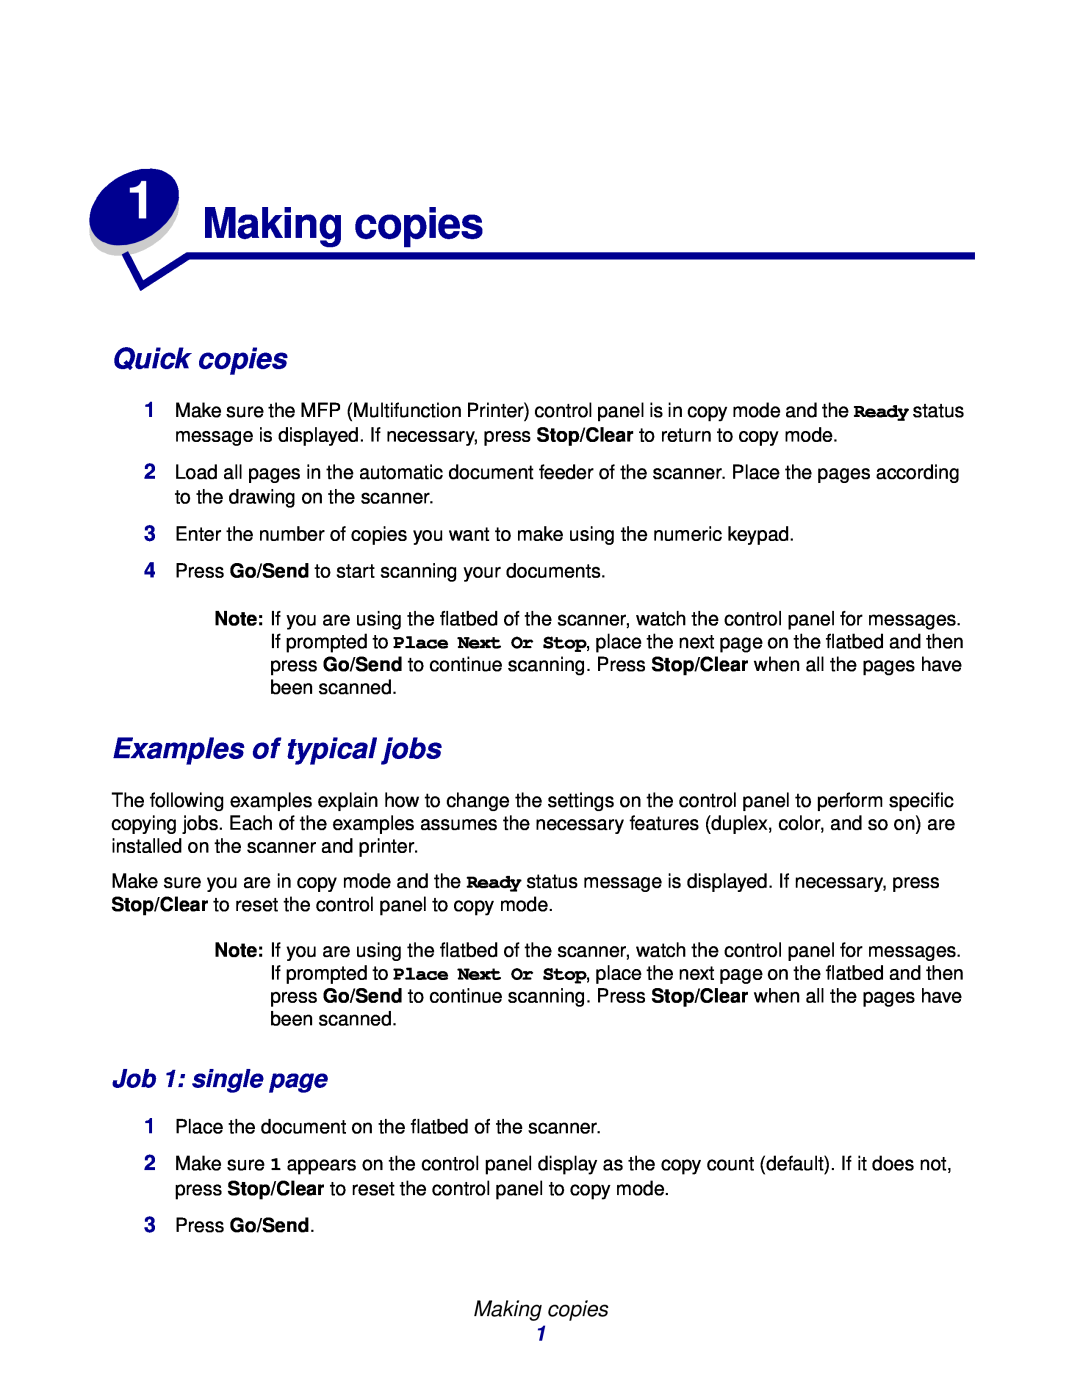 Lexmark 3200 manual Making copies, Quick copies, Examples of typical jobs, Job 1 single page 